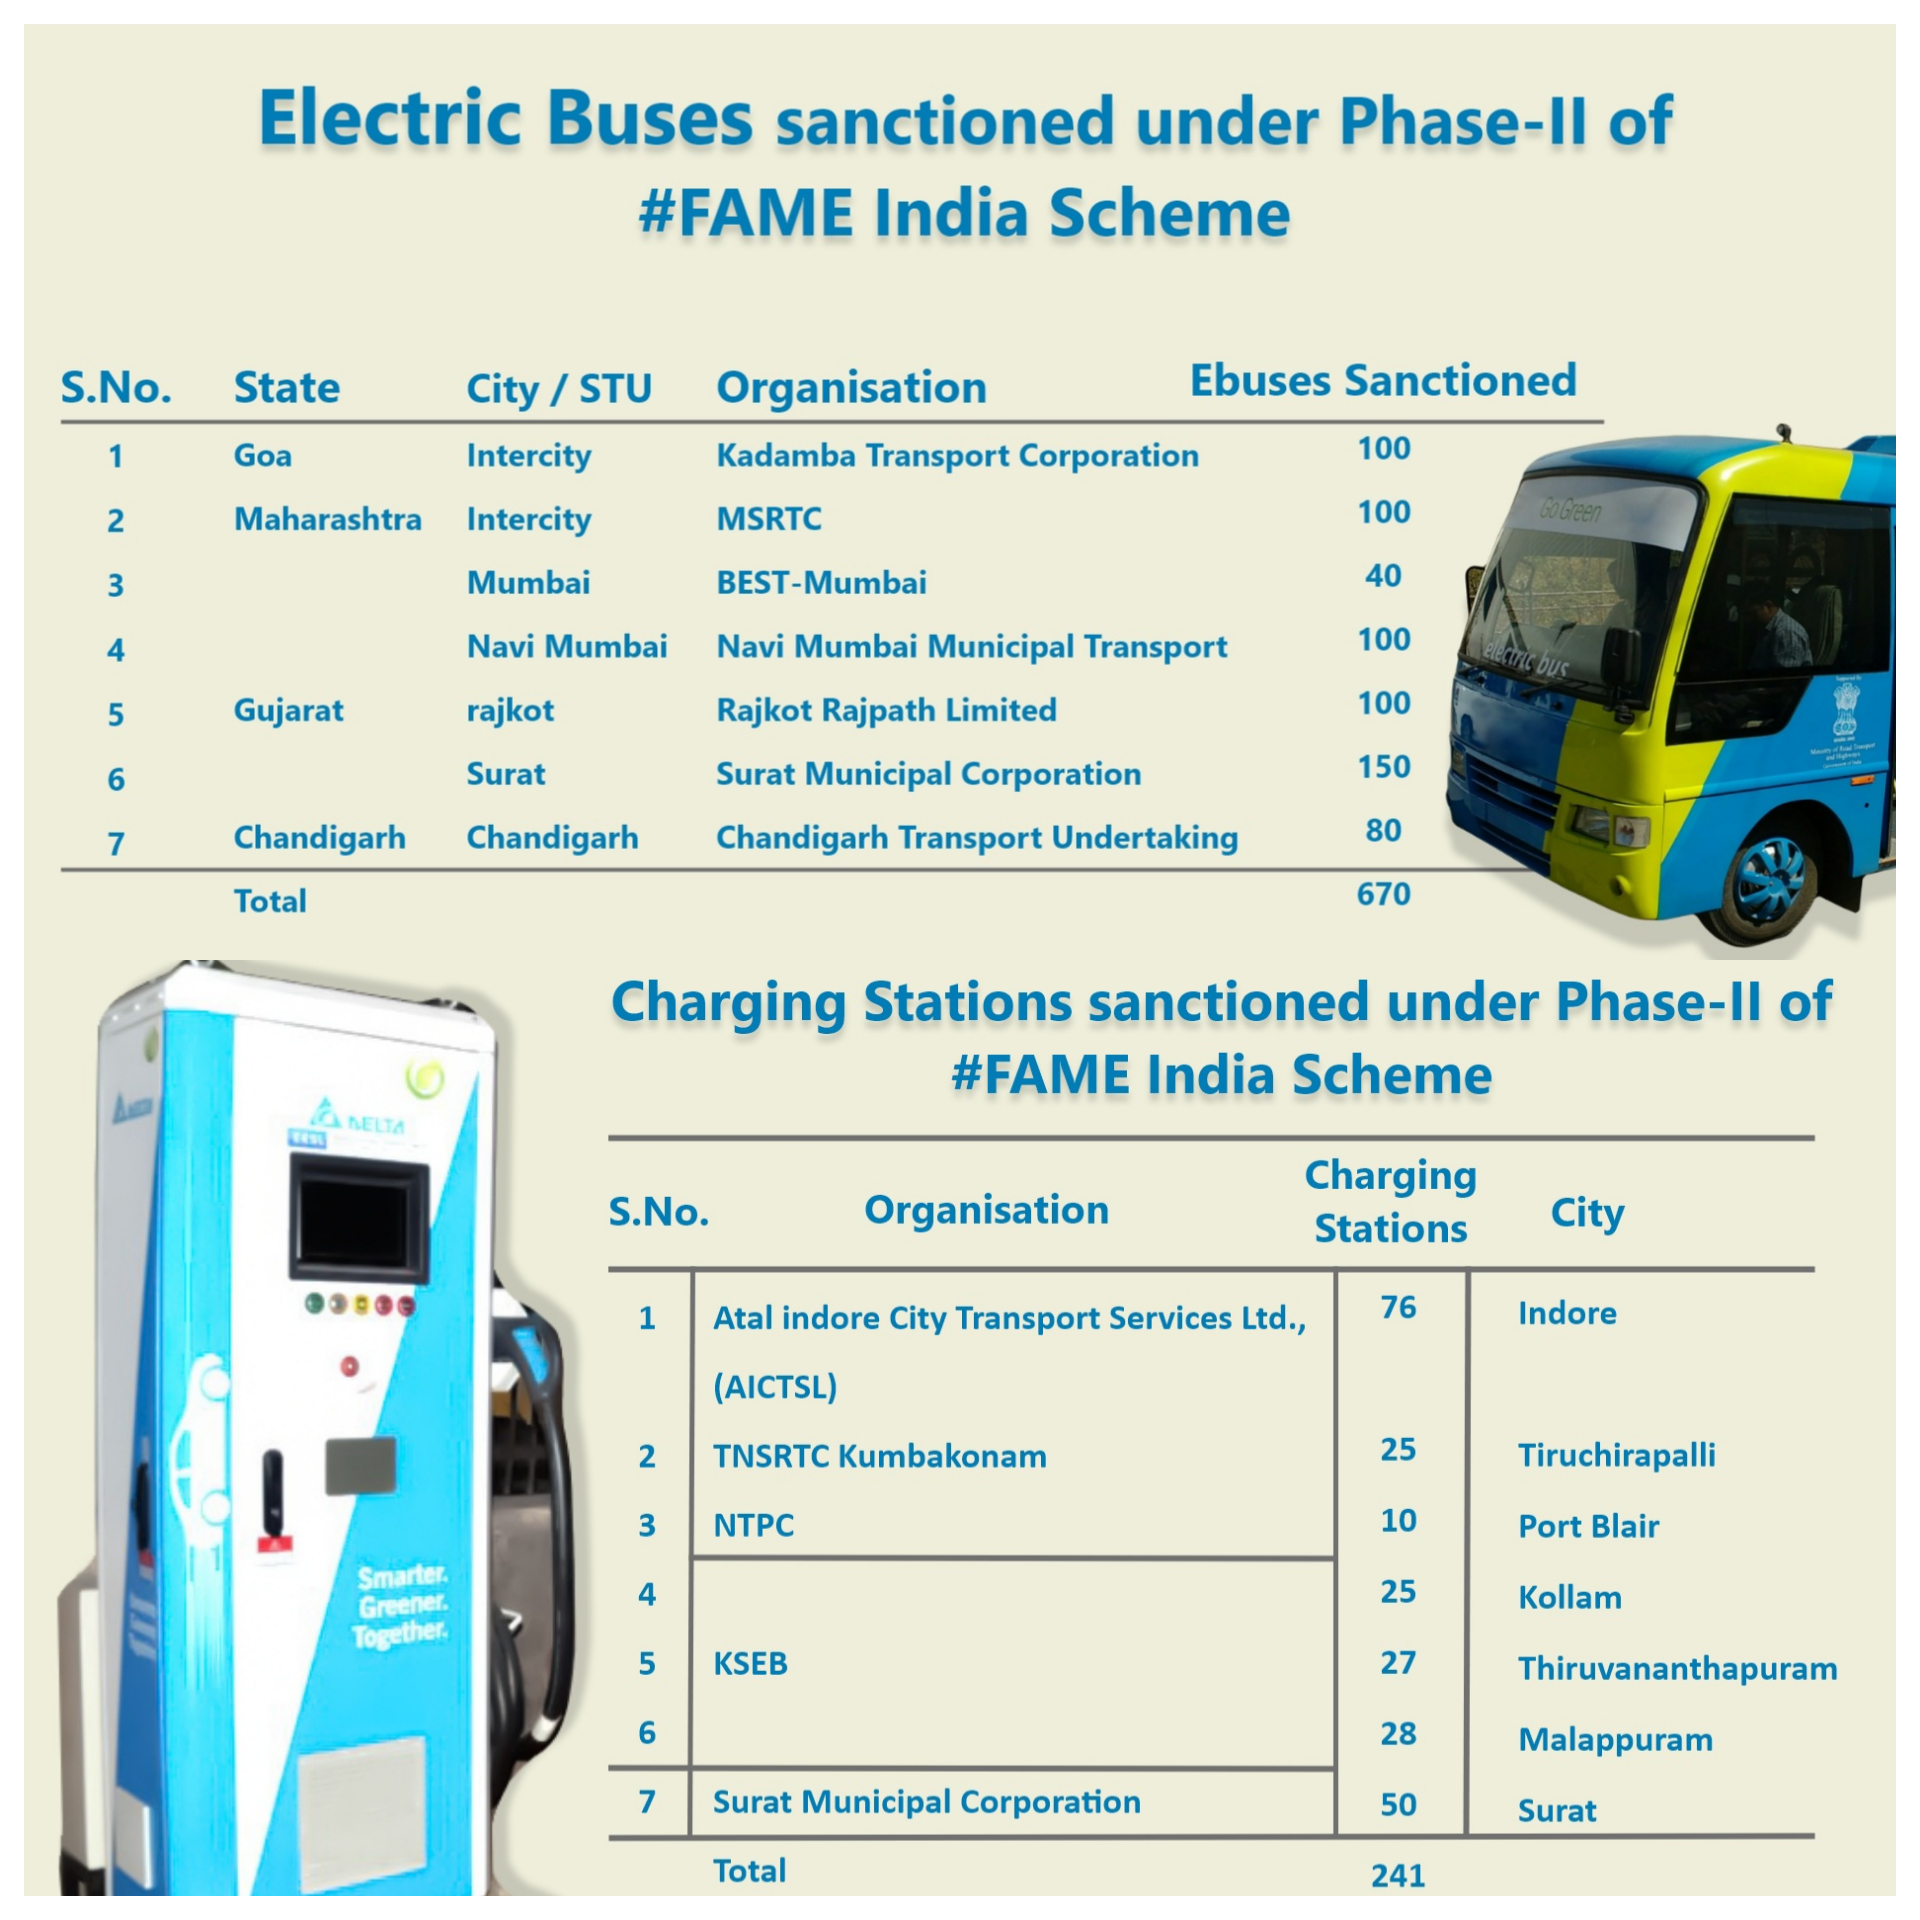 670-new-electric-buses-and-241-charging-stations-sanctioned-under-fame-scheme